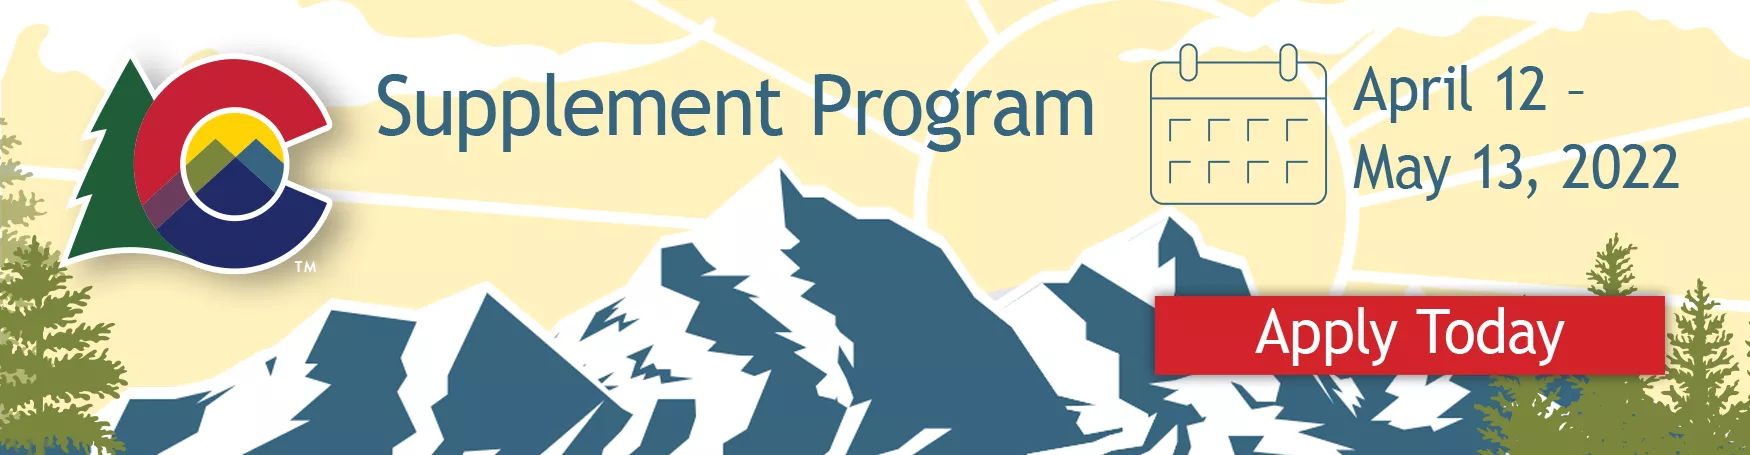 Apply for the Supplement Program (April 12 - May 13, 2022). Includes Colorado State logo and a background image of a mountain range reflected in a lake.